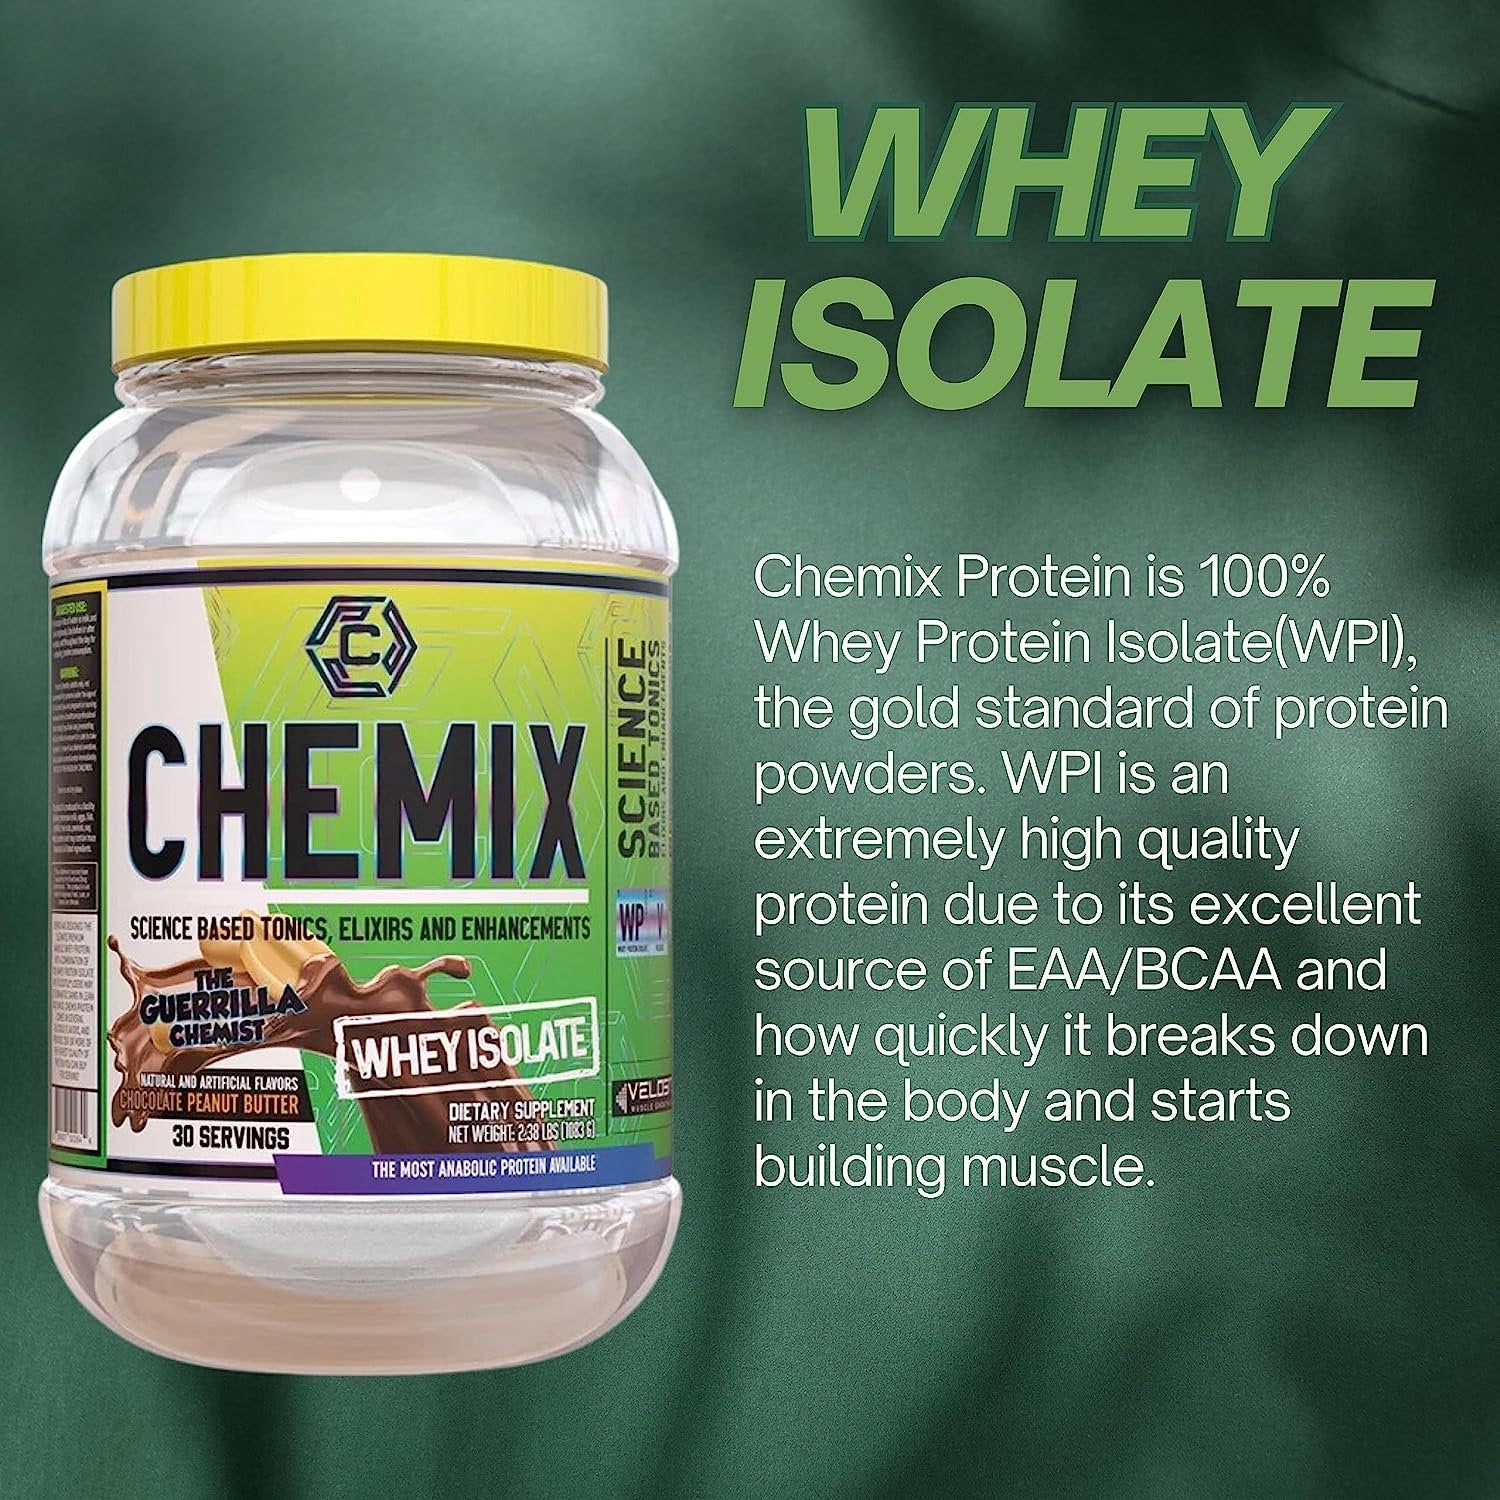 Chemix Whey Protein Isolate Chocolate Peanut Butter Flavor- Pure Whey Protein Powder 2Lb (30 Servings) - with Bonus worldwidenutrition Multi Purpose Key Chain